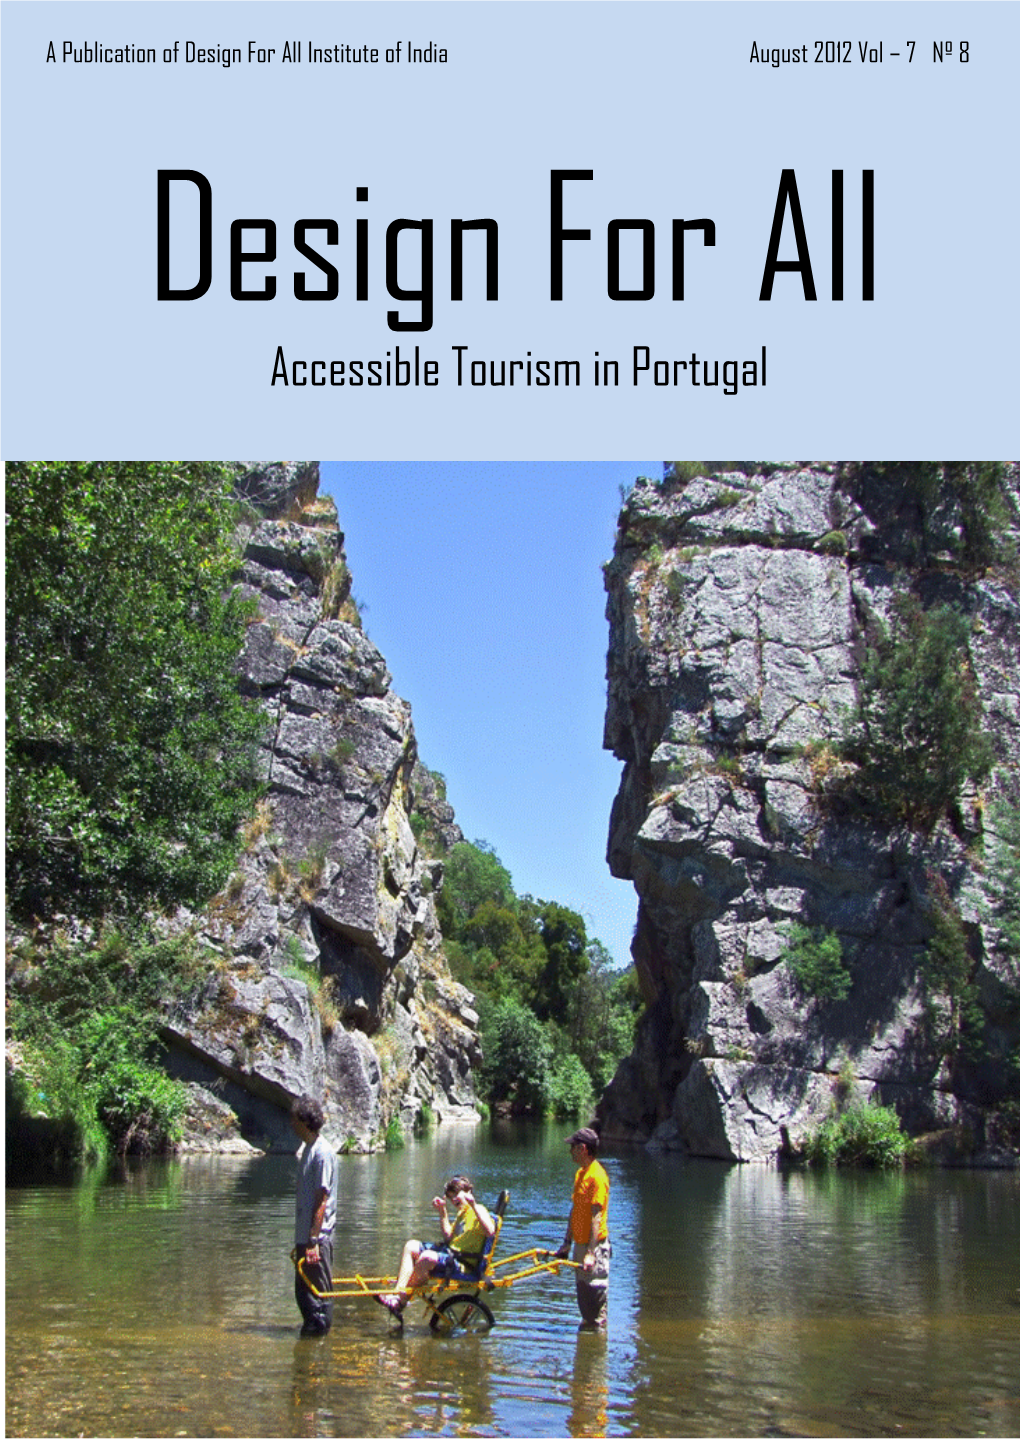 Accessible Tourism in Portugal